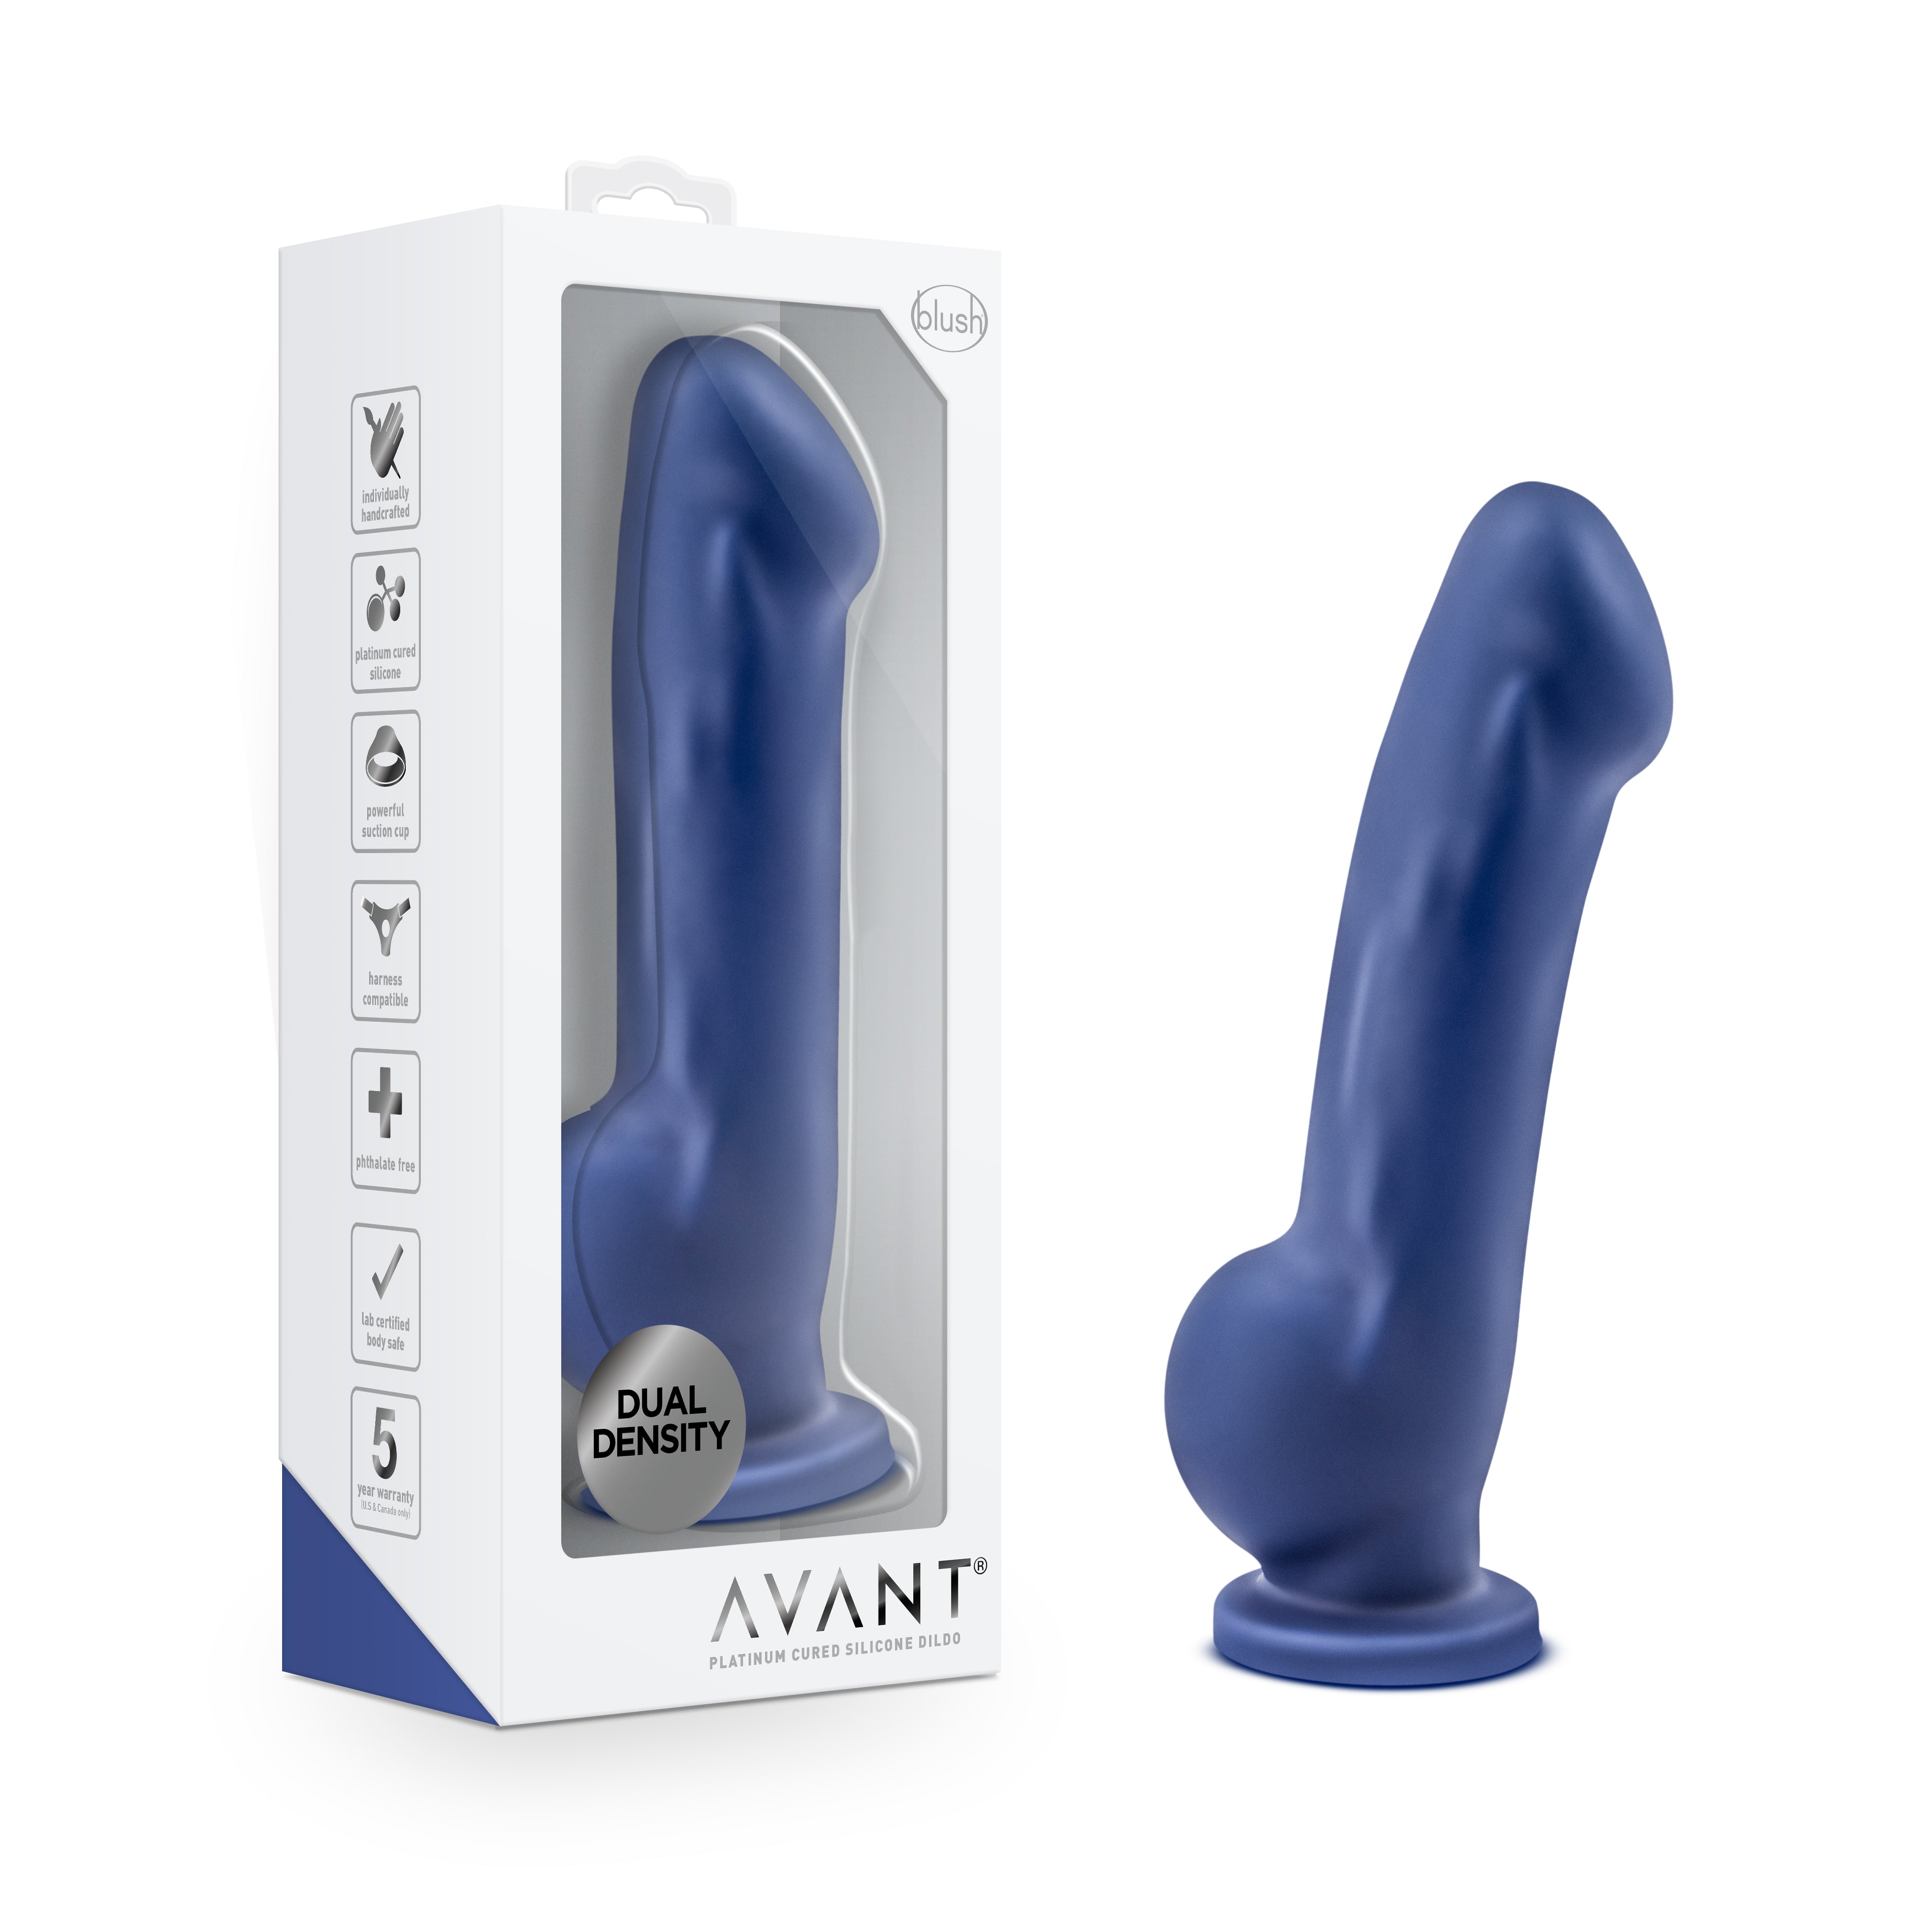 blue dildo and packaging